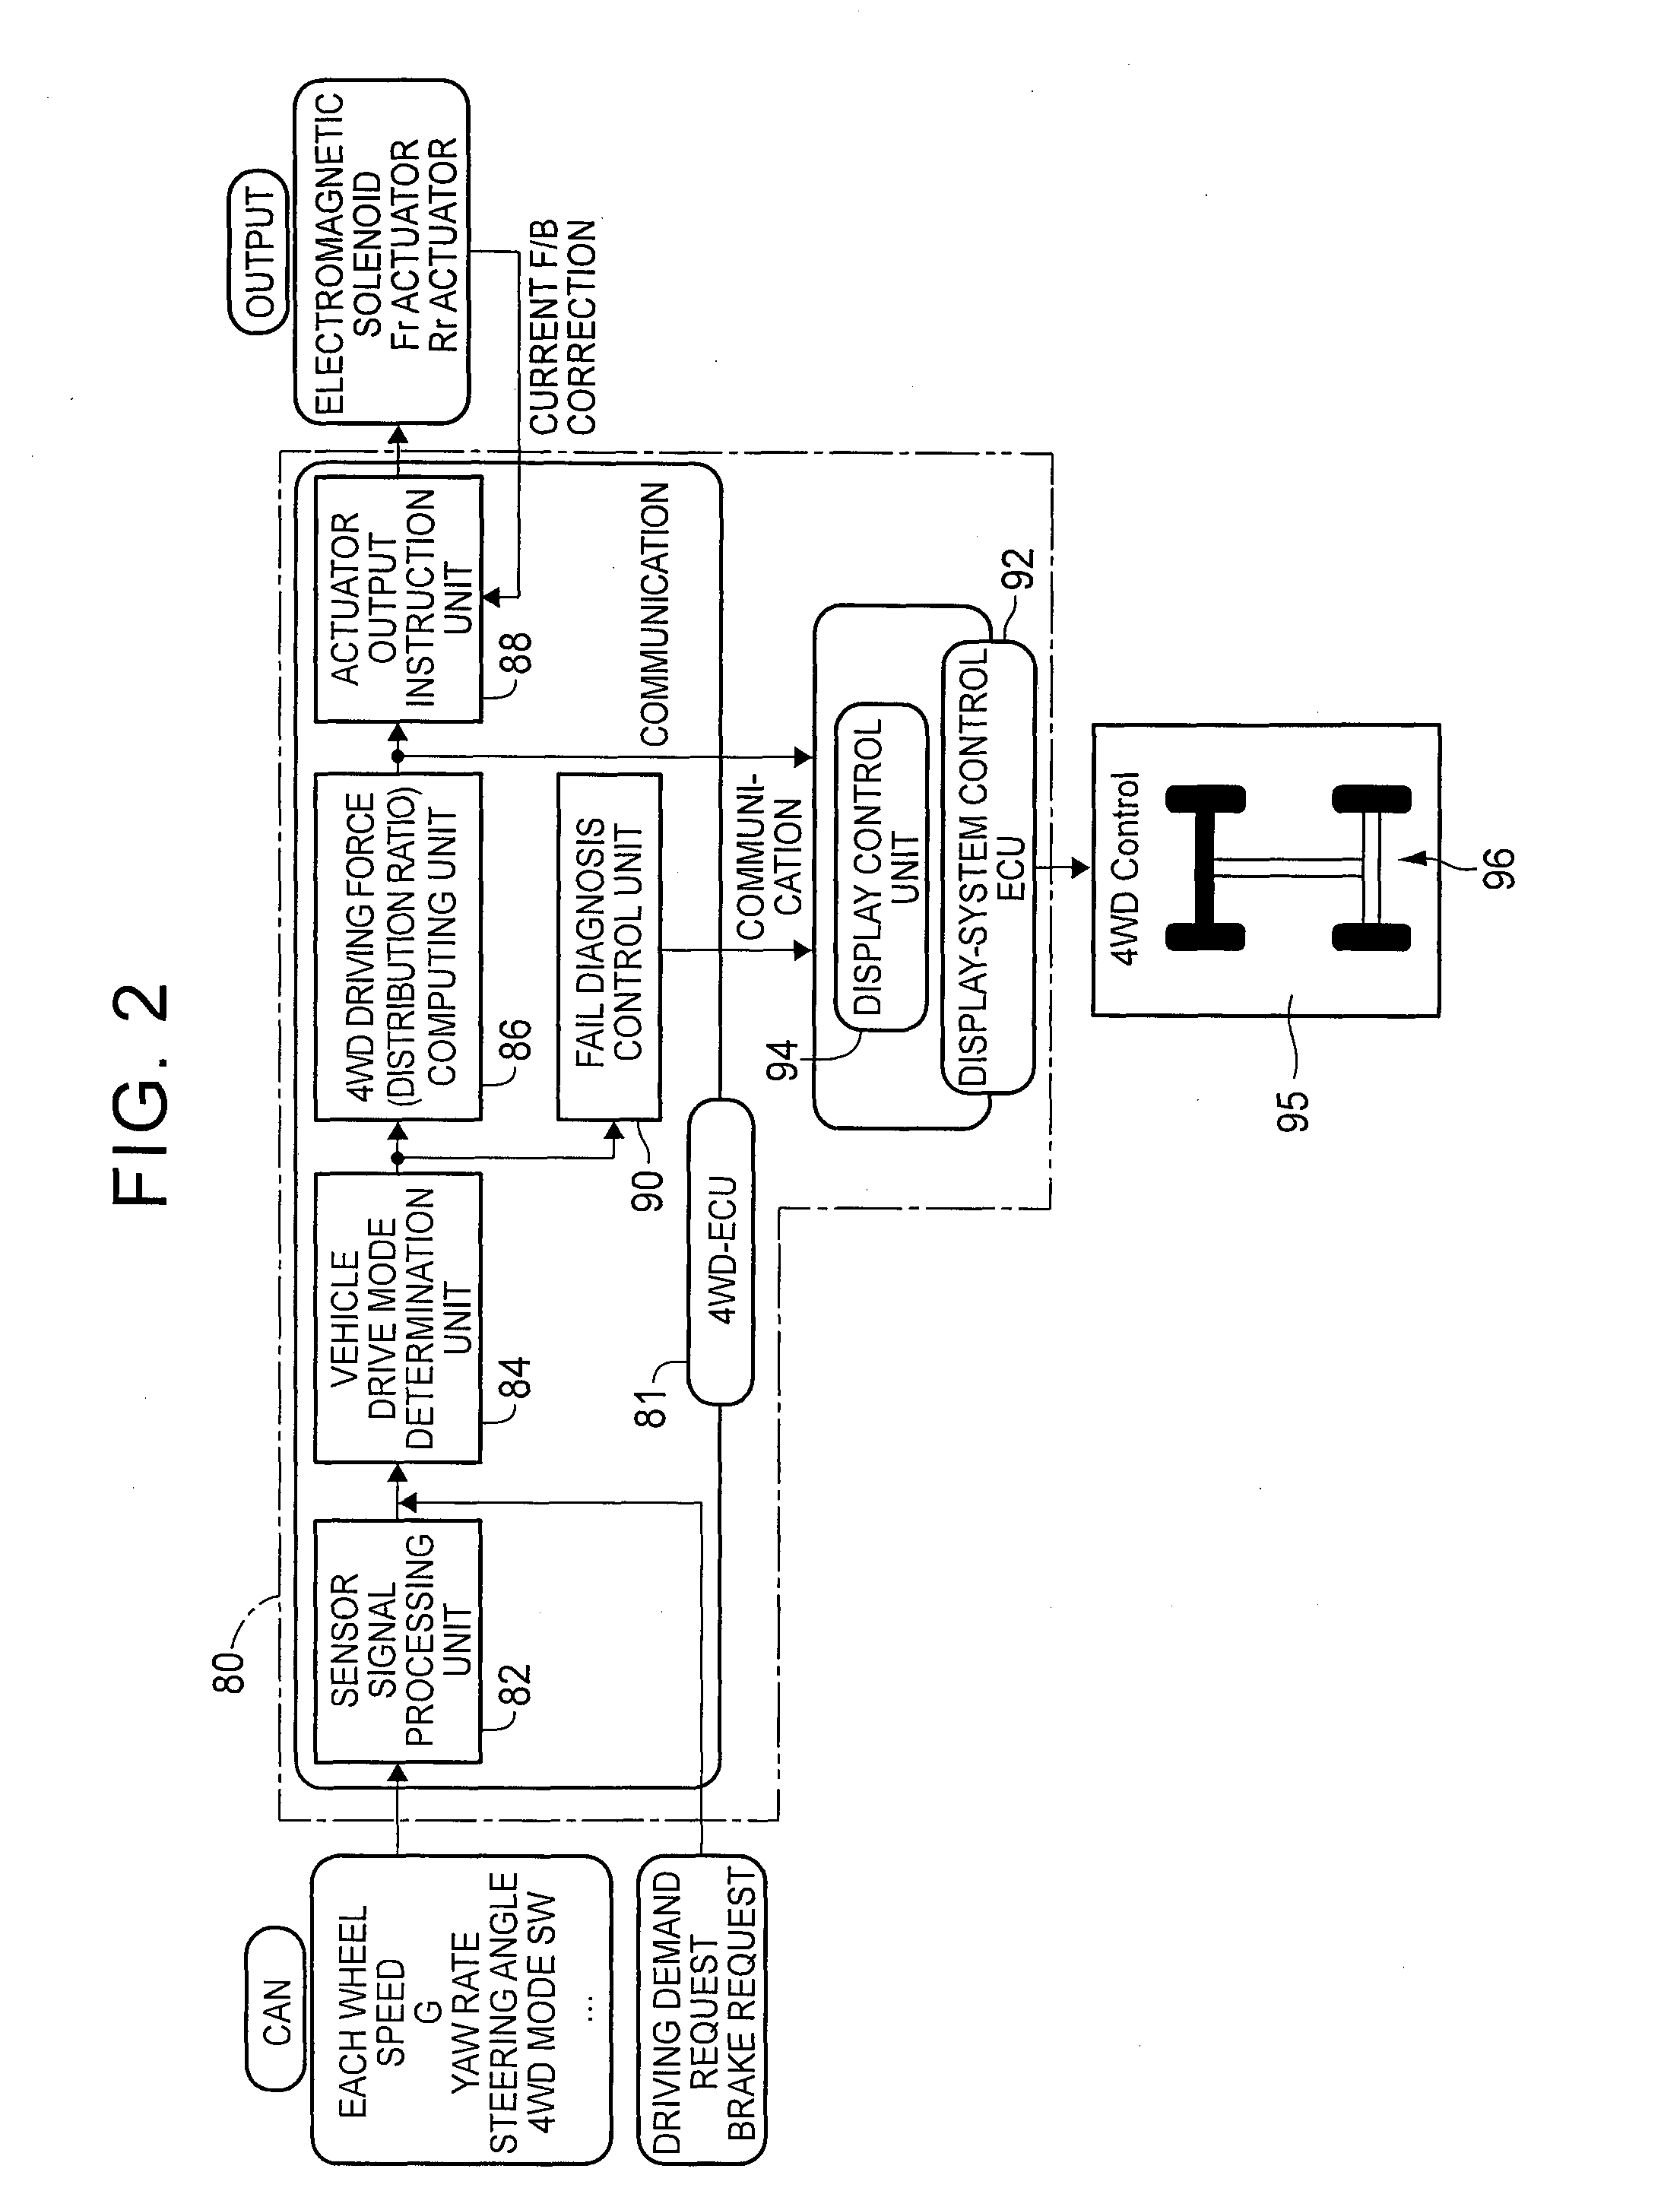 Control system for four-wheel drive vehicle